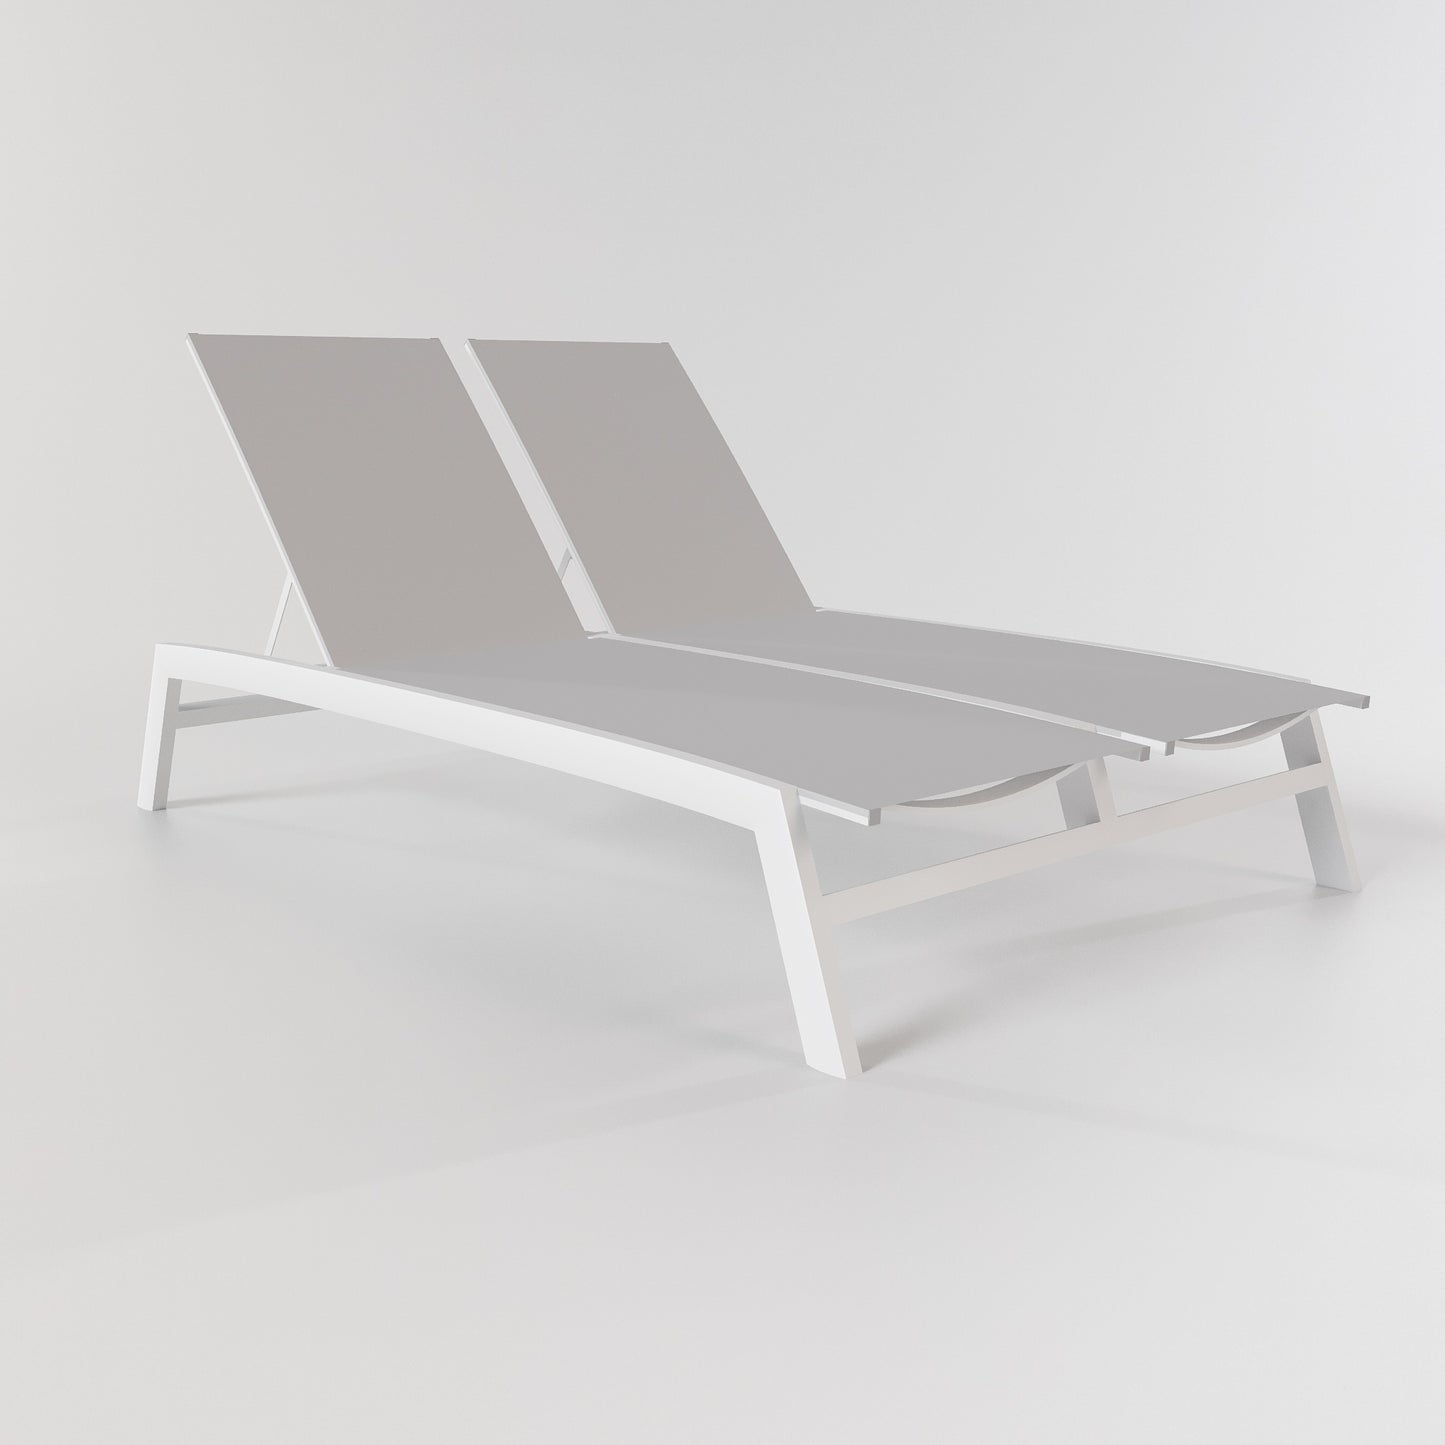 Biscayne Double Sun Lounger